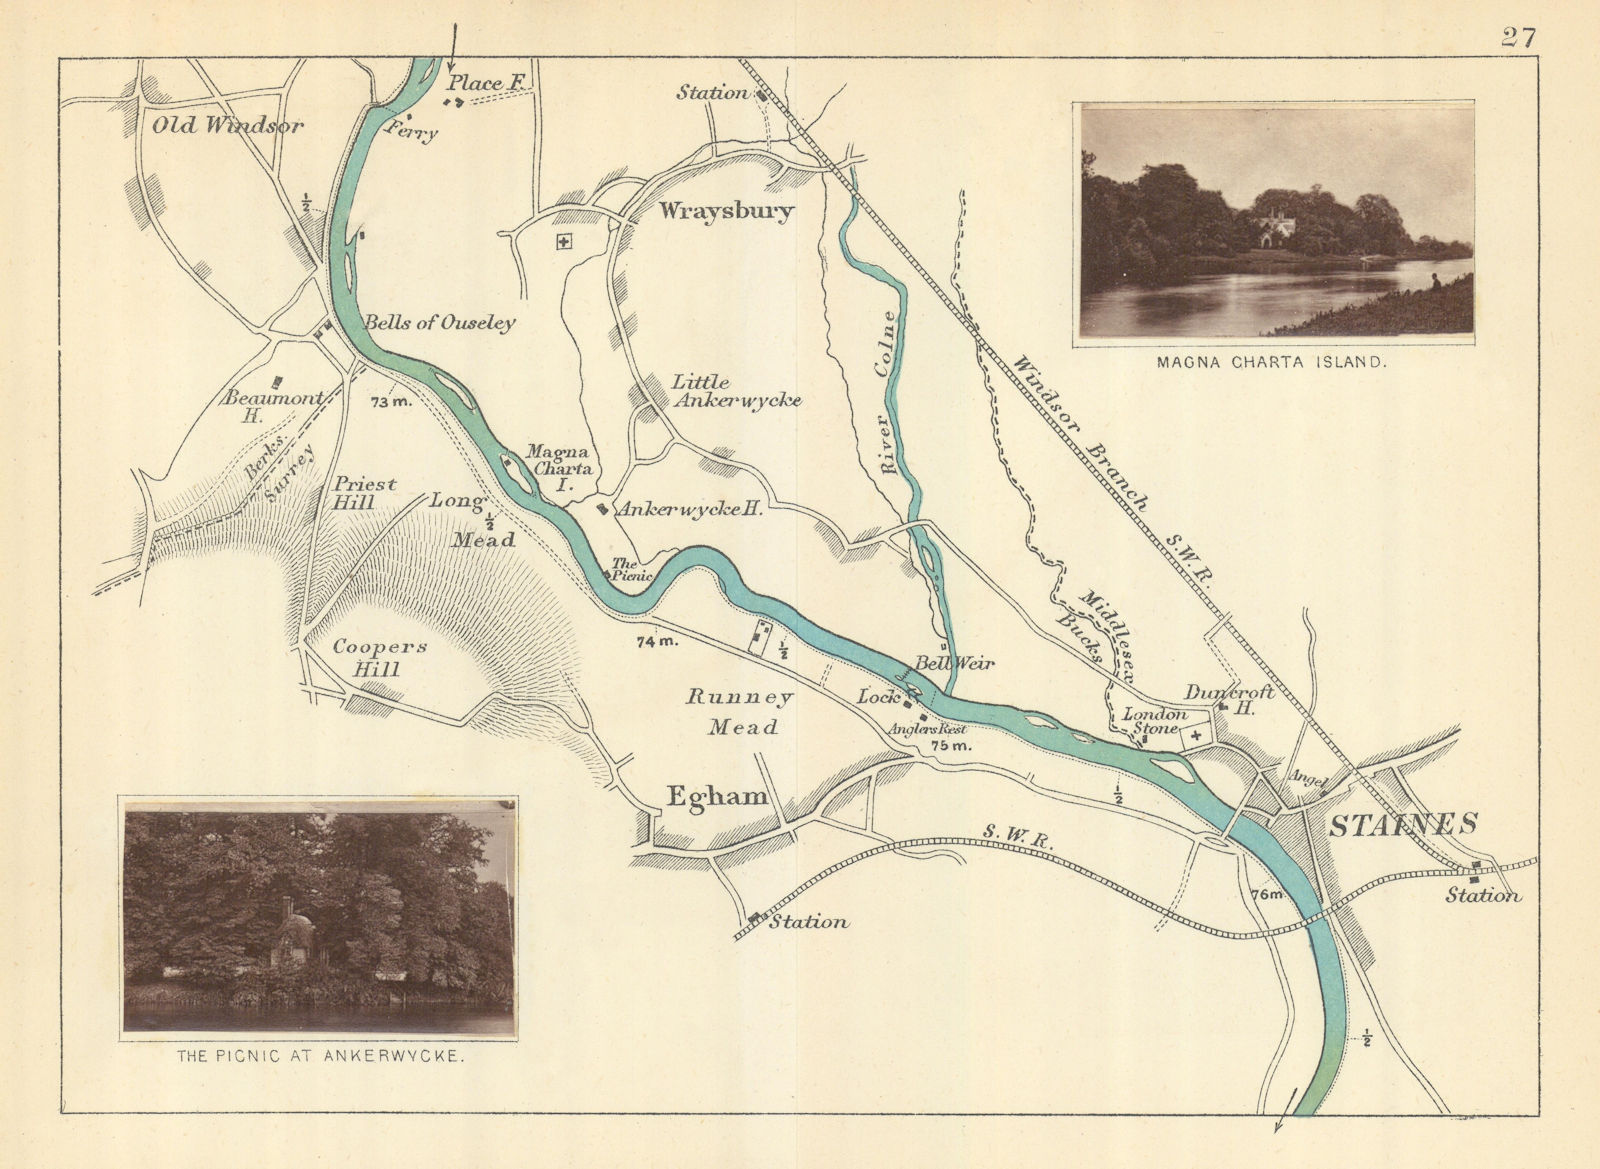 RIVER THAMES Old Windsor Wraysbury Egham Staines Ankerwycke. TAUNT 1879 map